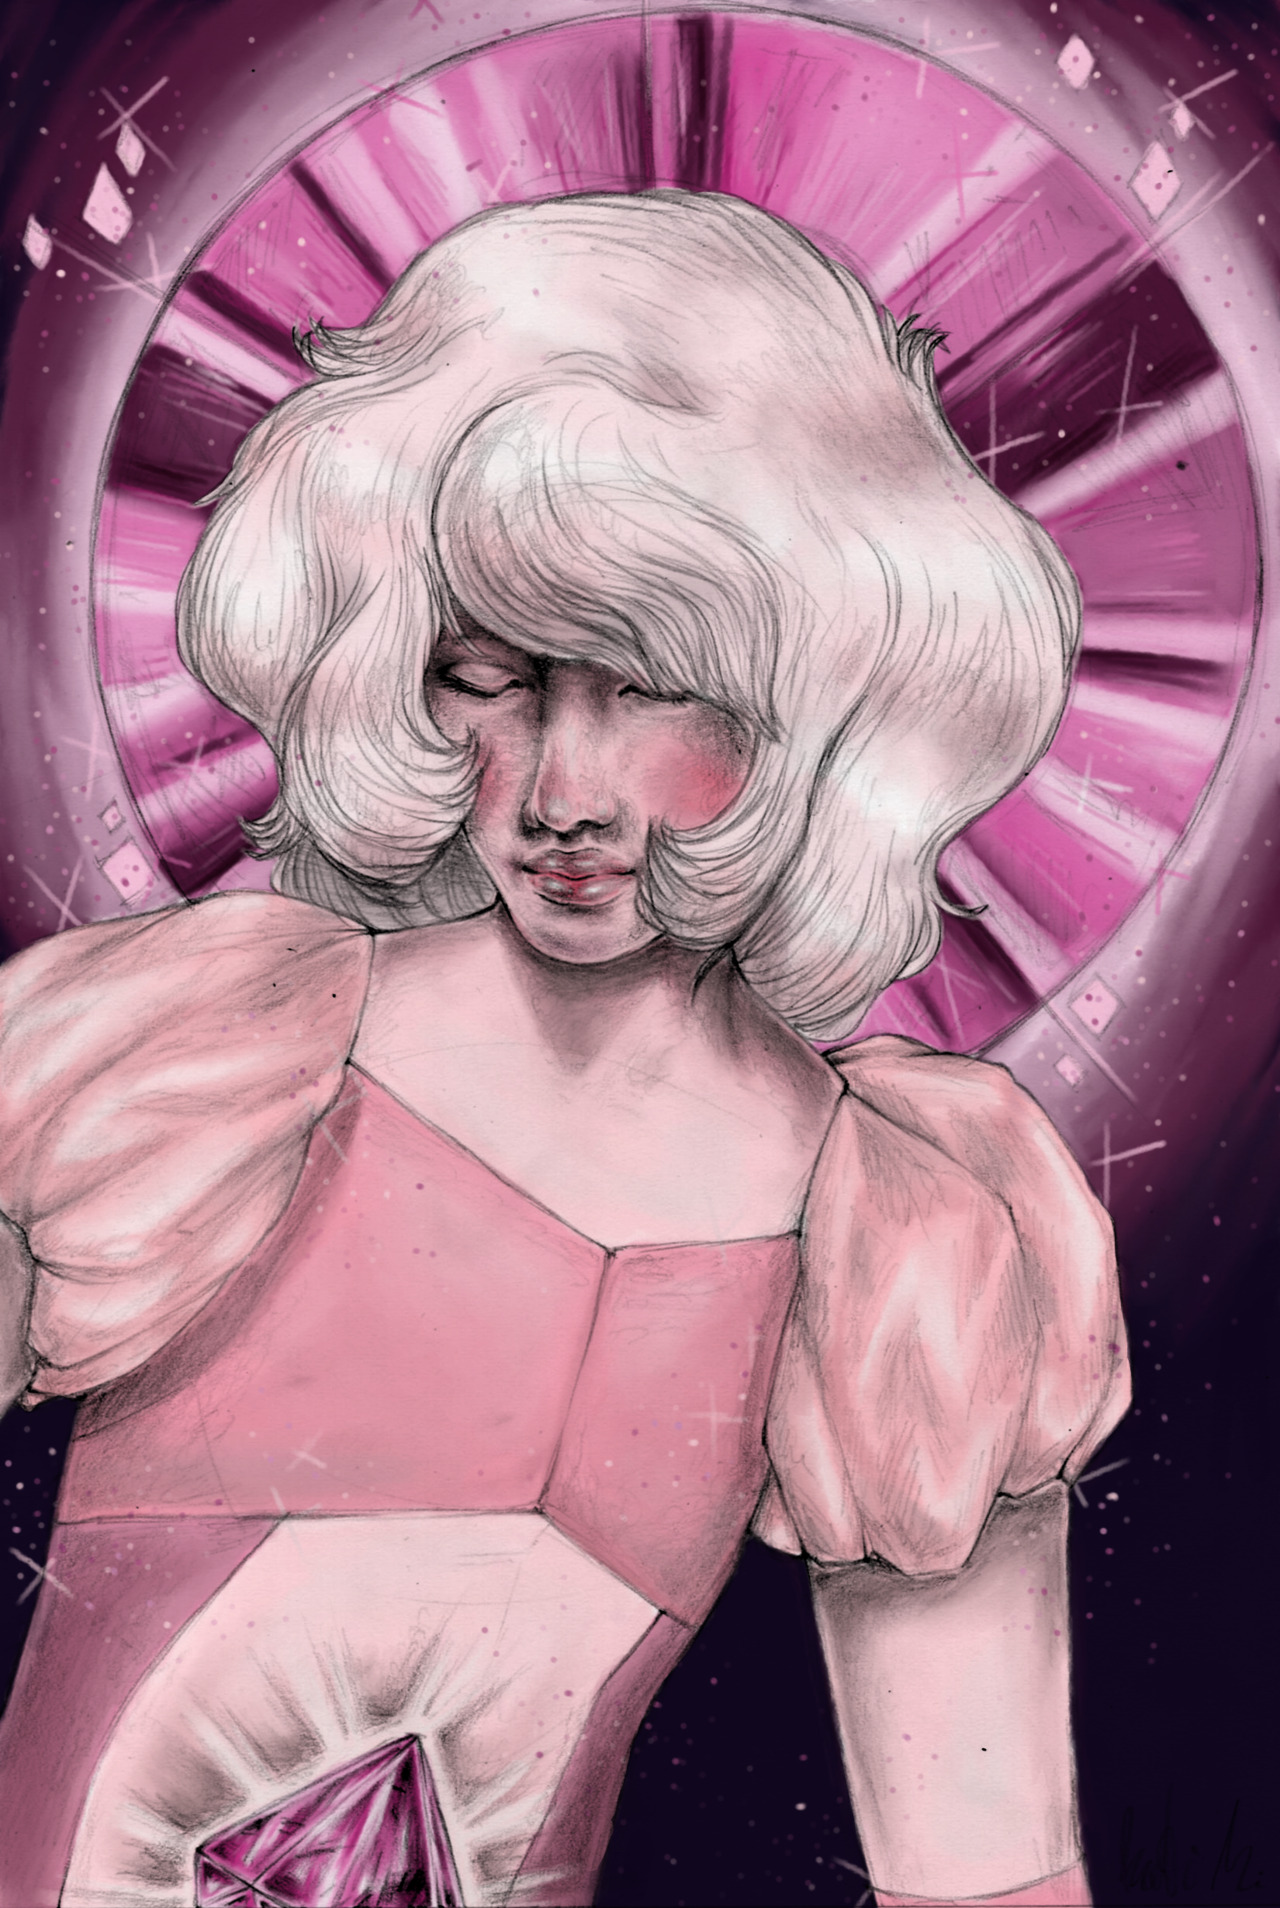 All rise for the gleaming Pink Diamond! I tried to color it, I like the look of it but I know it could be better.